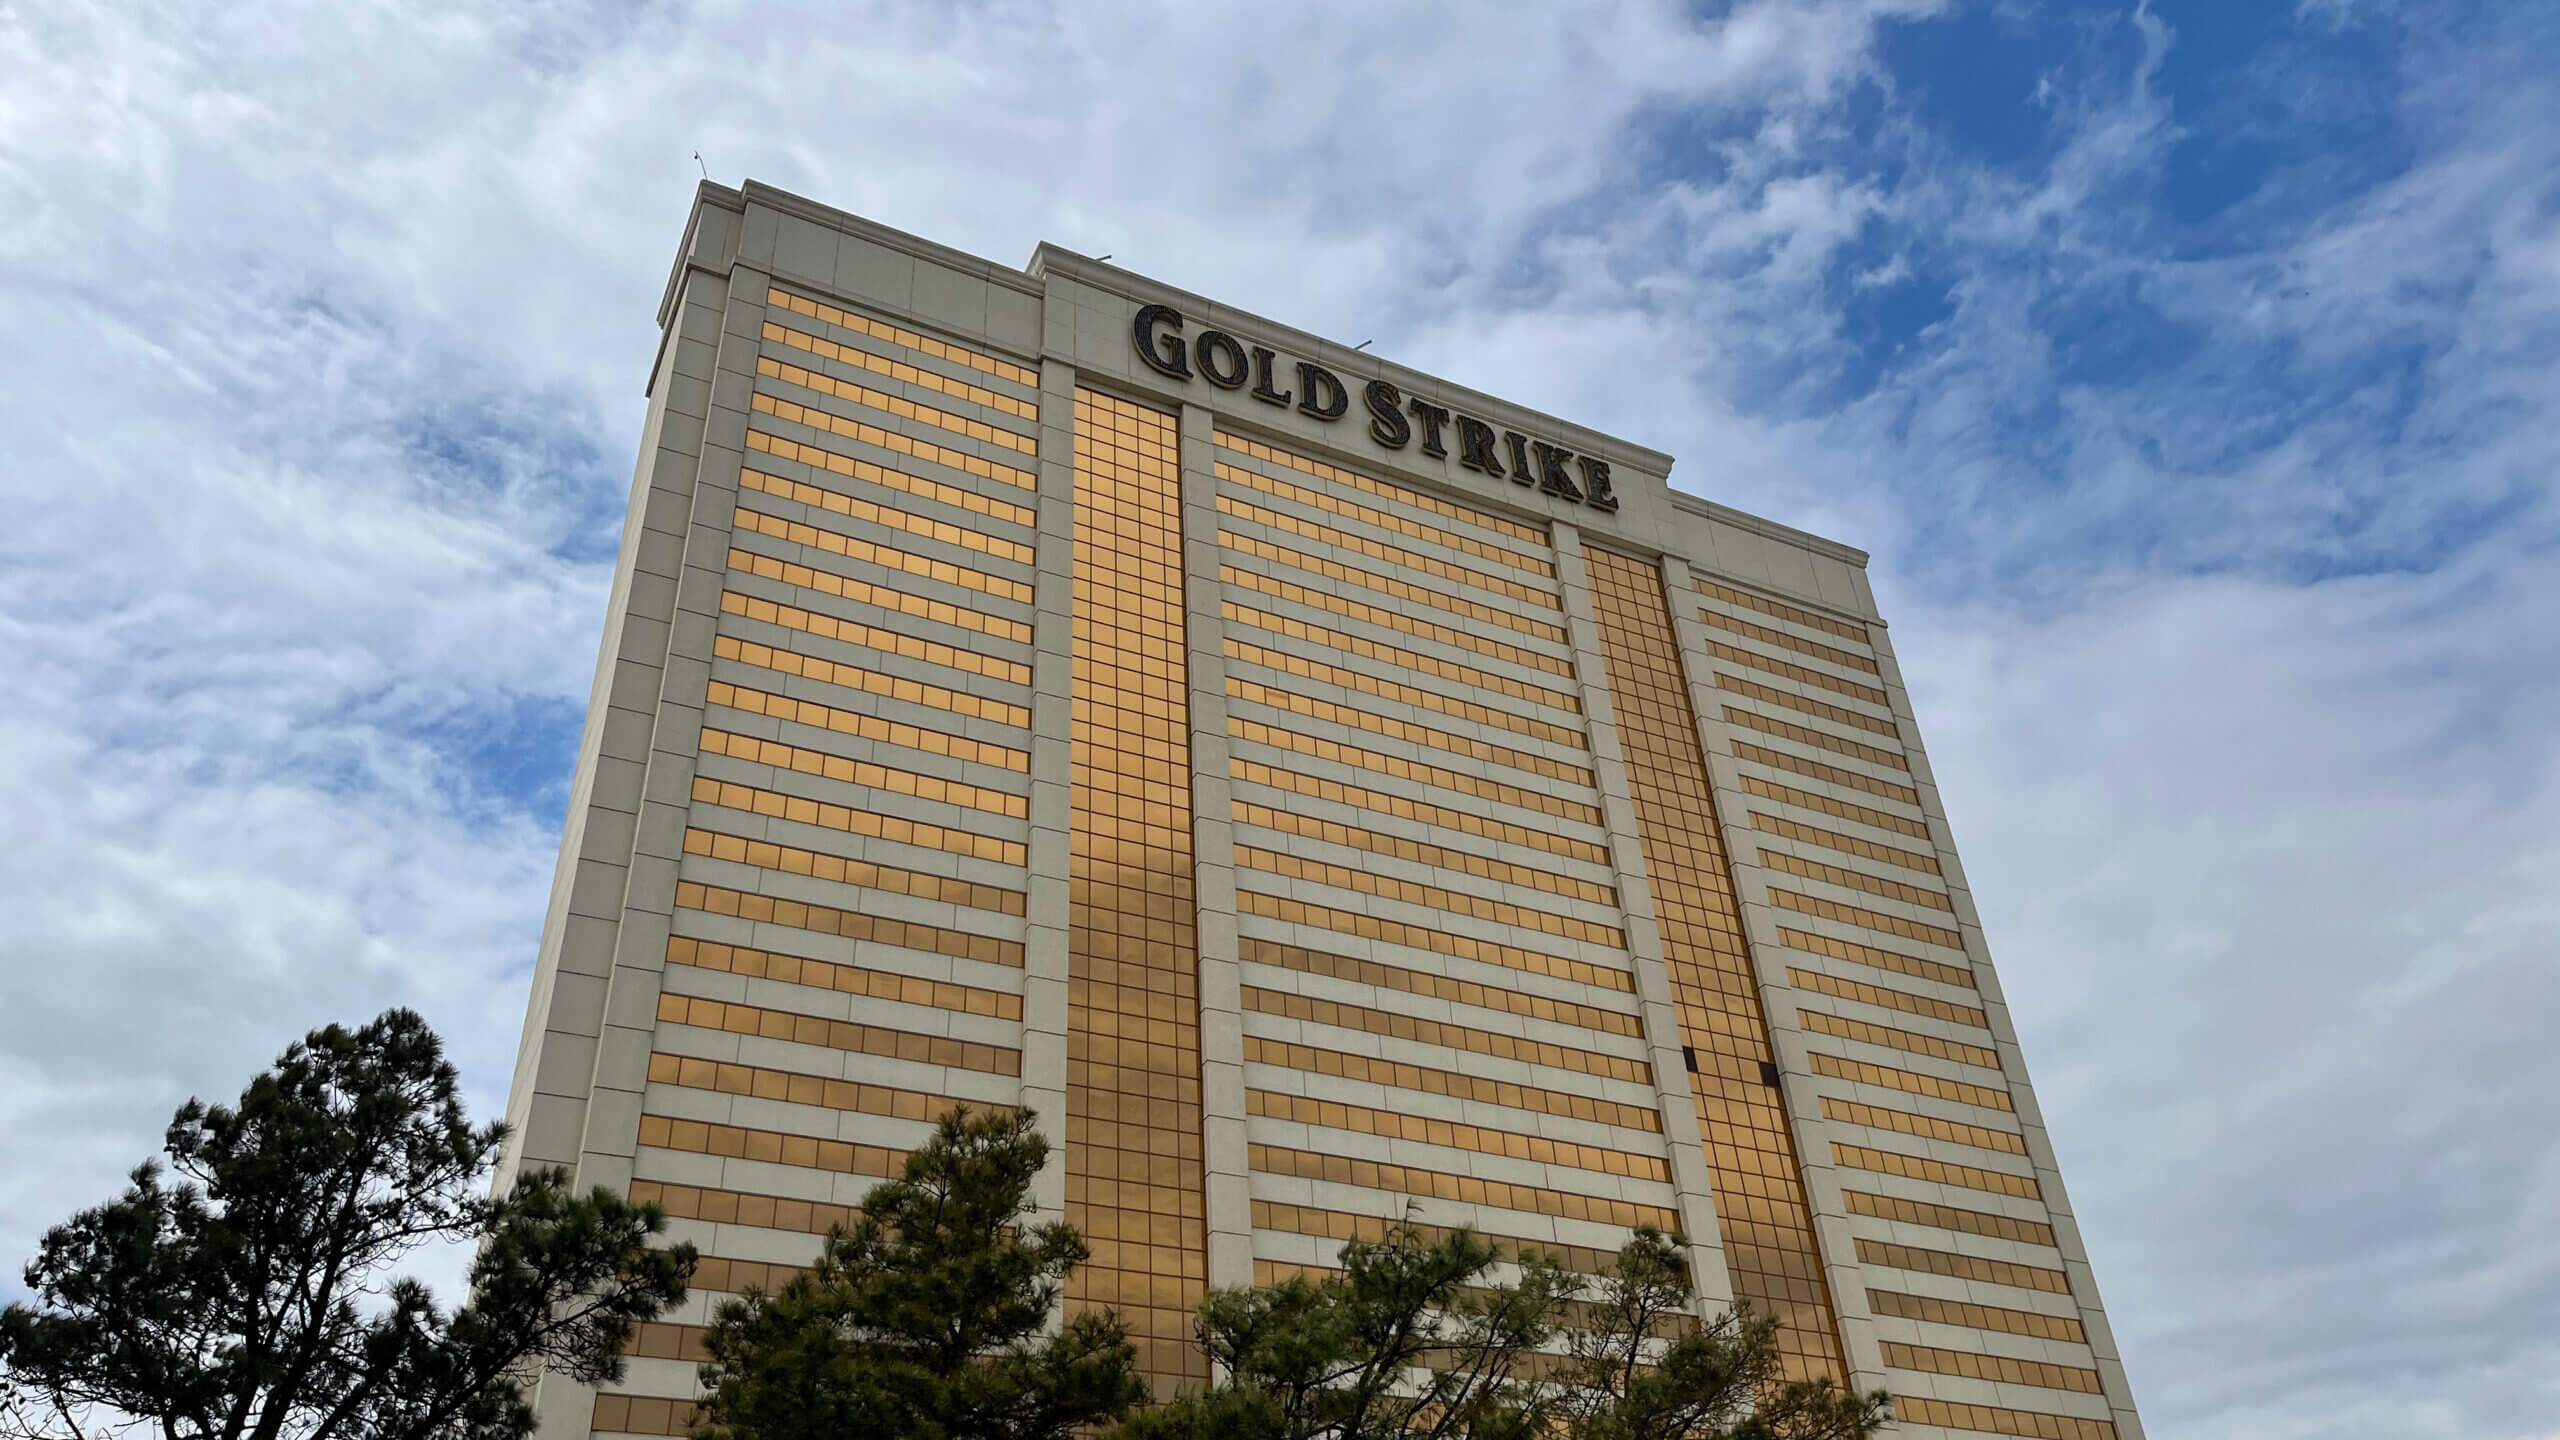 Gold Strike Casino ownership change officially celebrated DeSoto